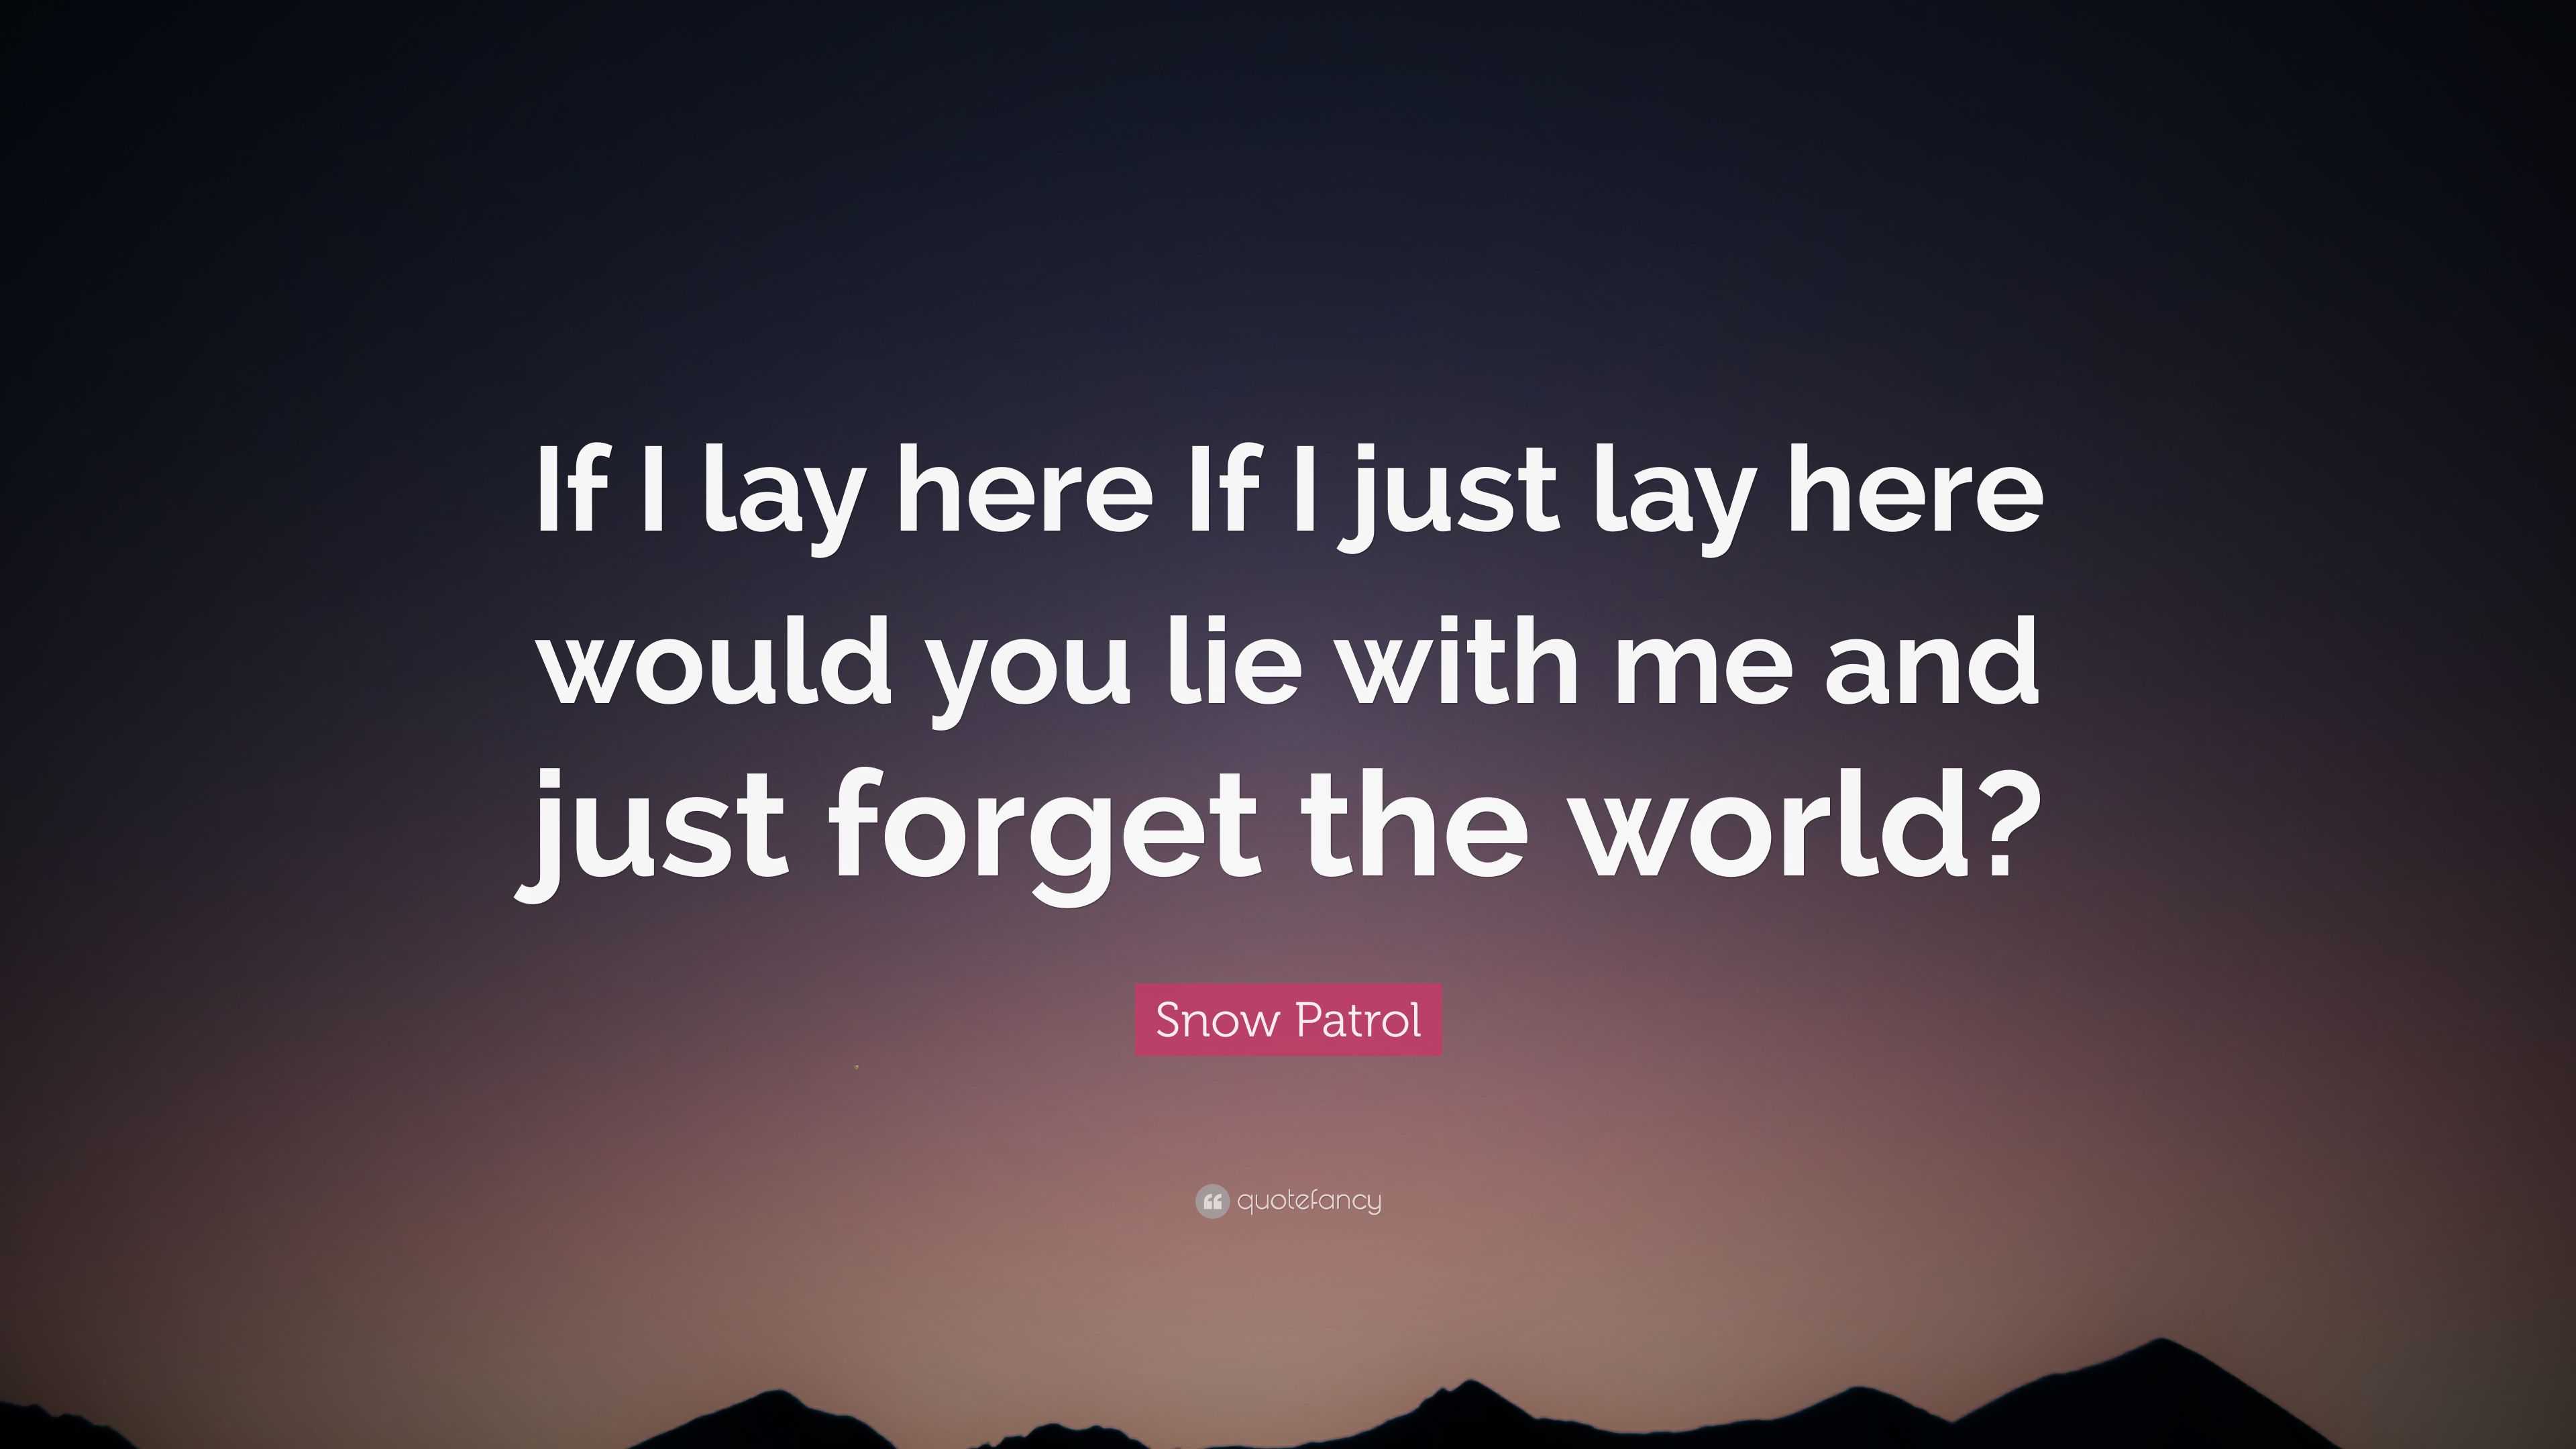 Vinyl Wall Saying Quote Words Decal If I just Lay here Would You Lie with me and just Forget The World Vinyl Quote Me If I Lay here 